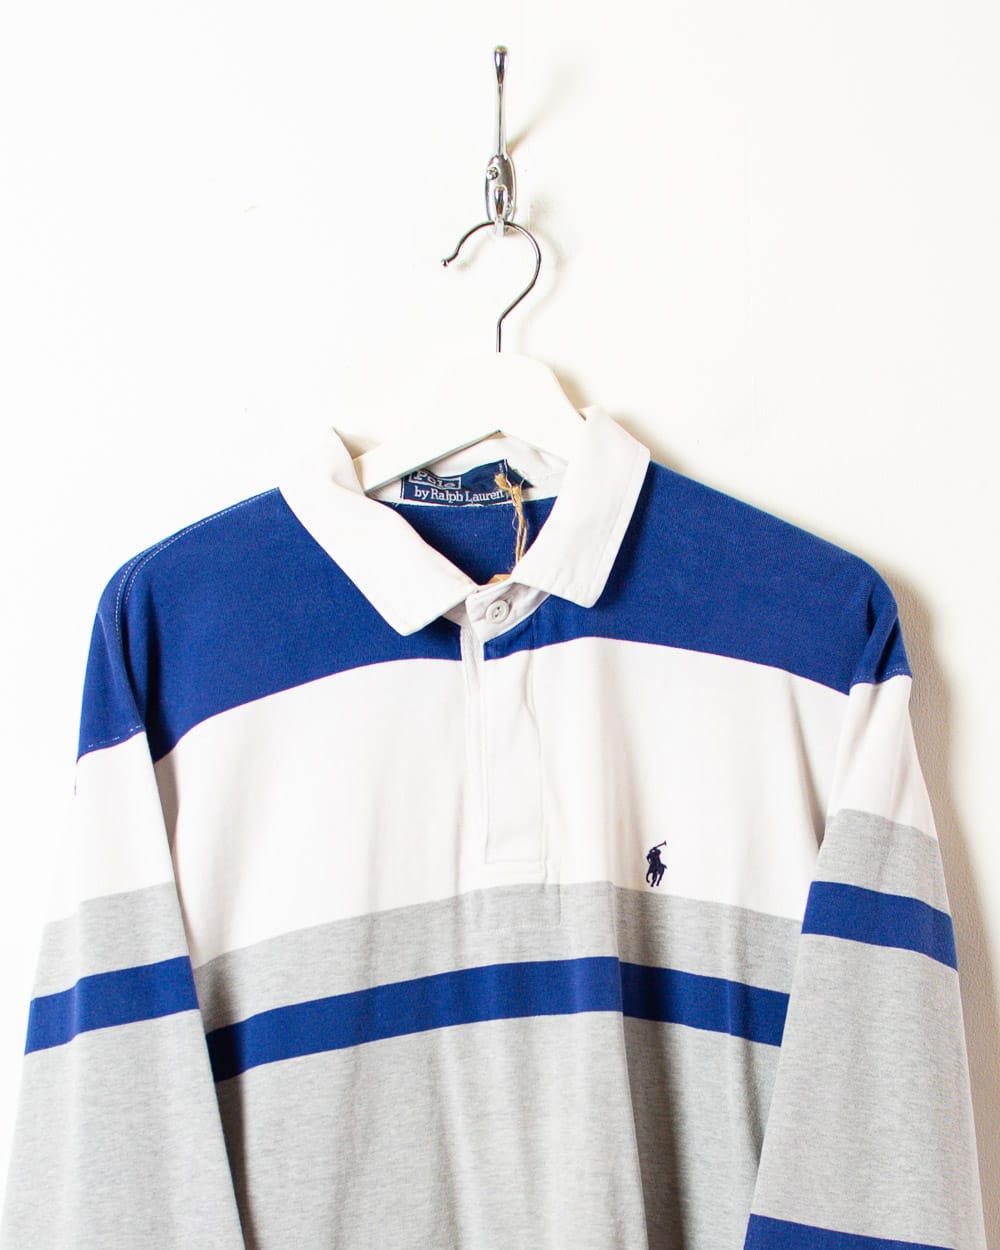 Stone Polo Ralph Lauren Rugby Shirt - X-Large